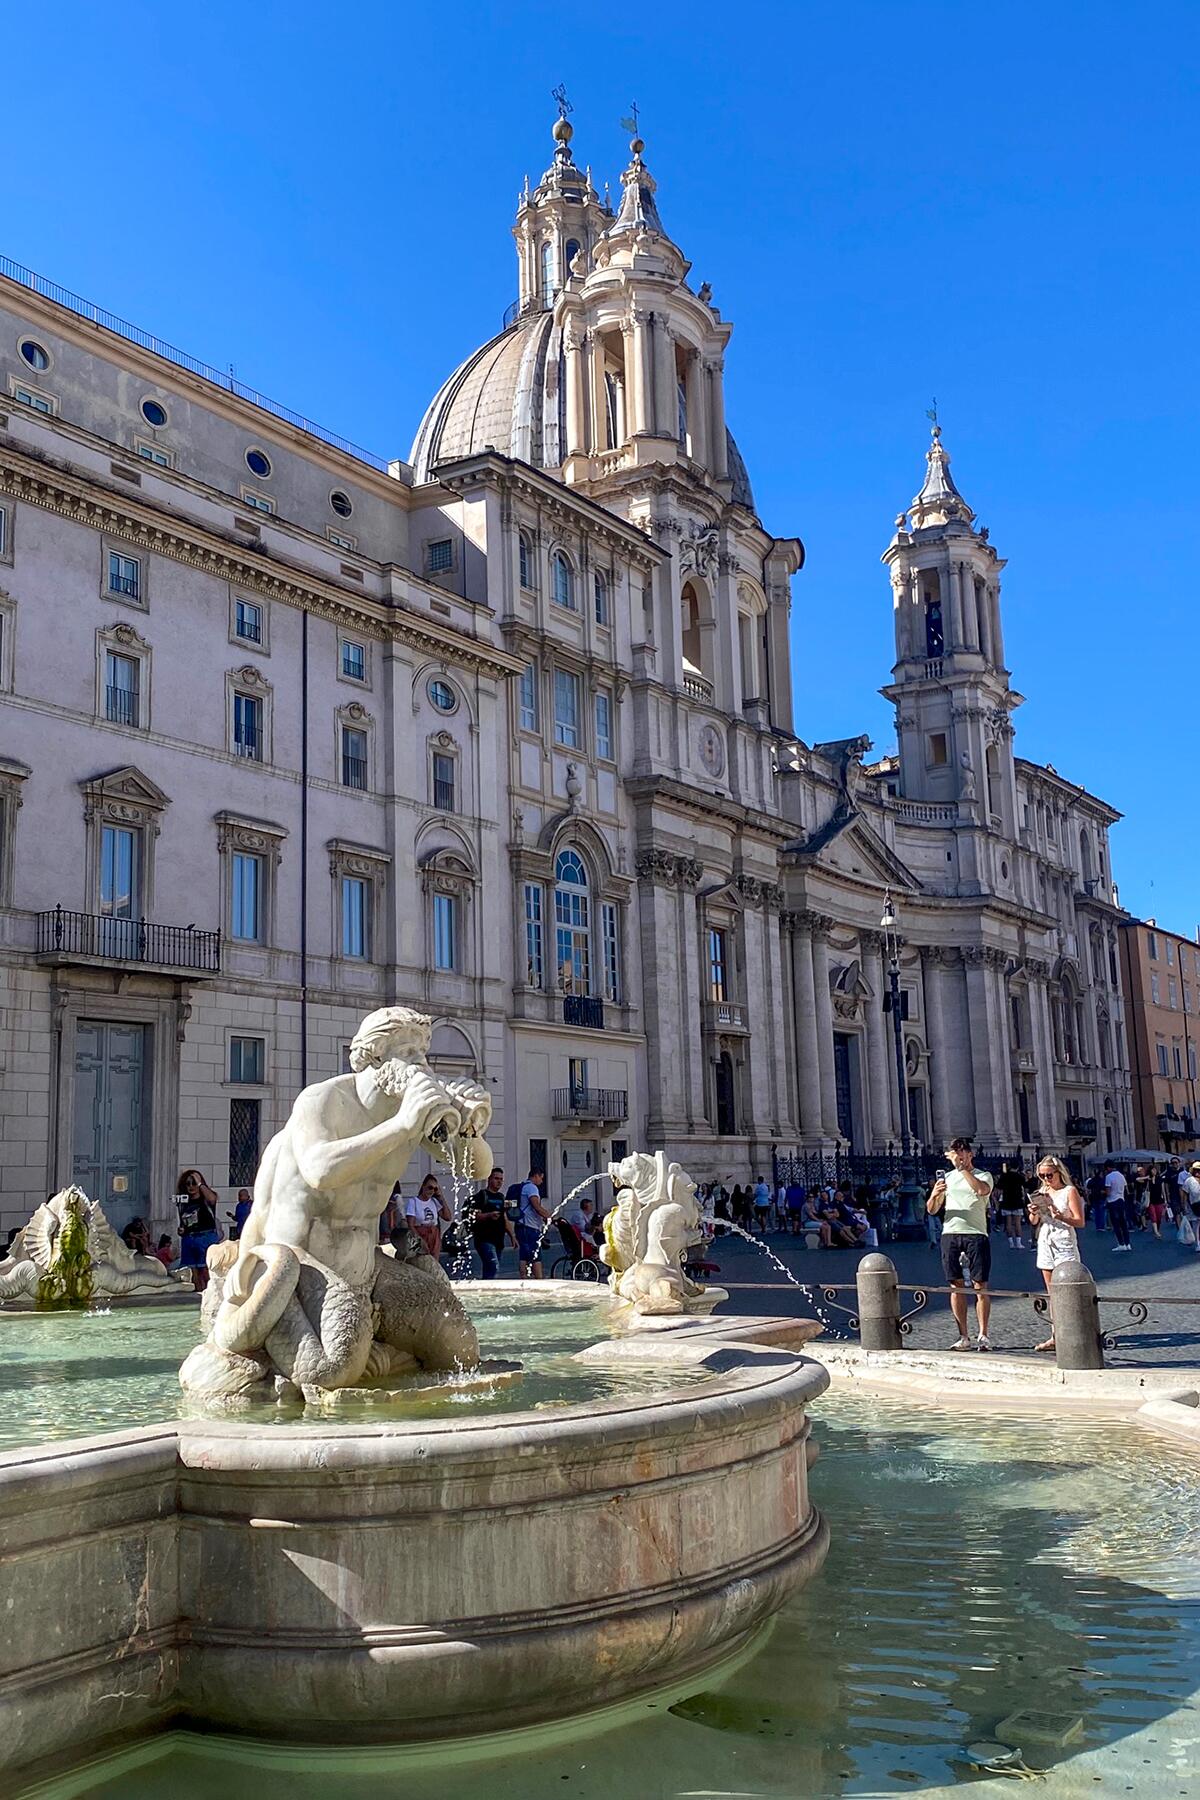 Image 8, Piazza Navona fountains